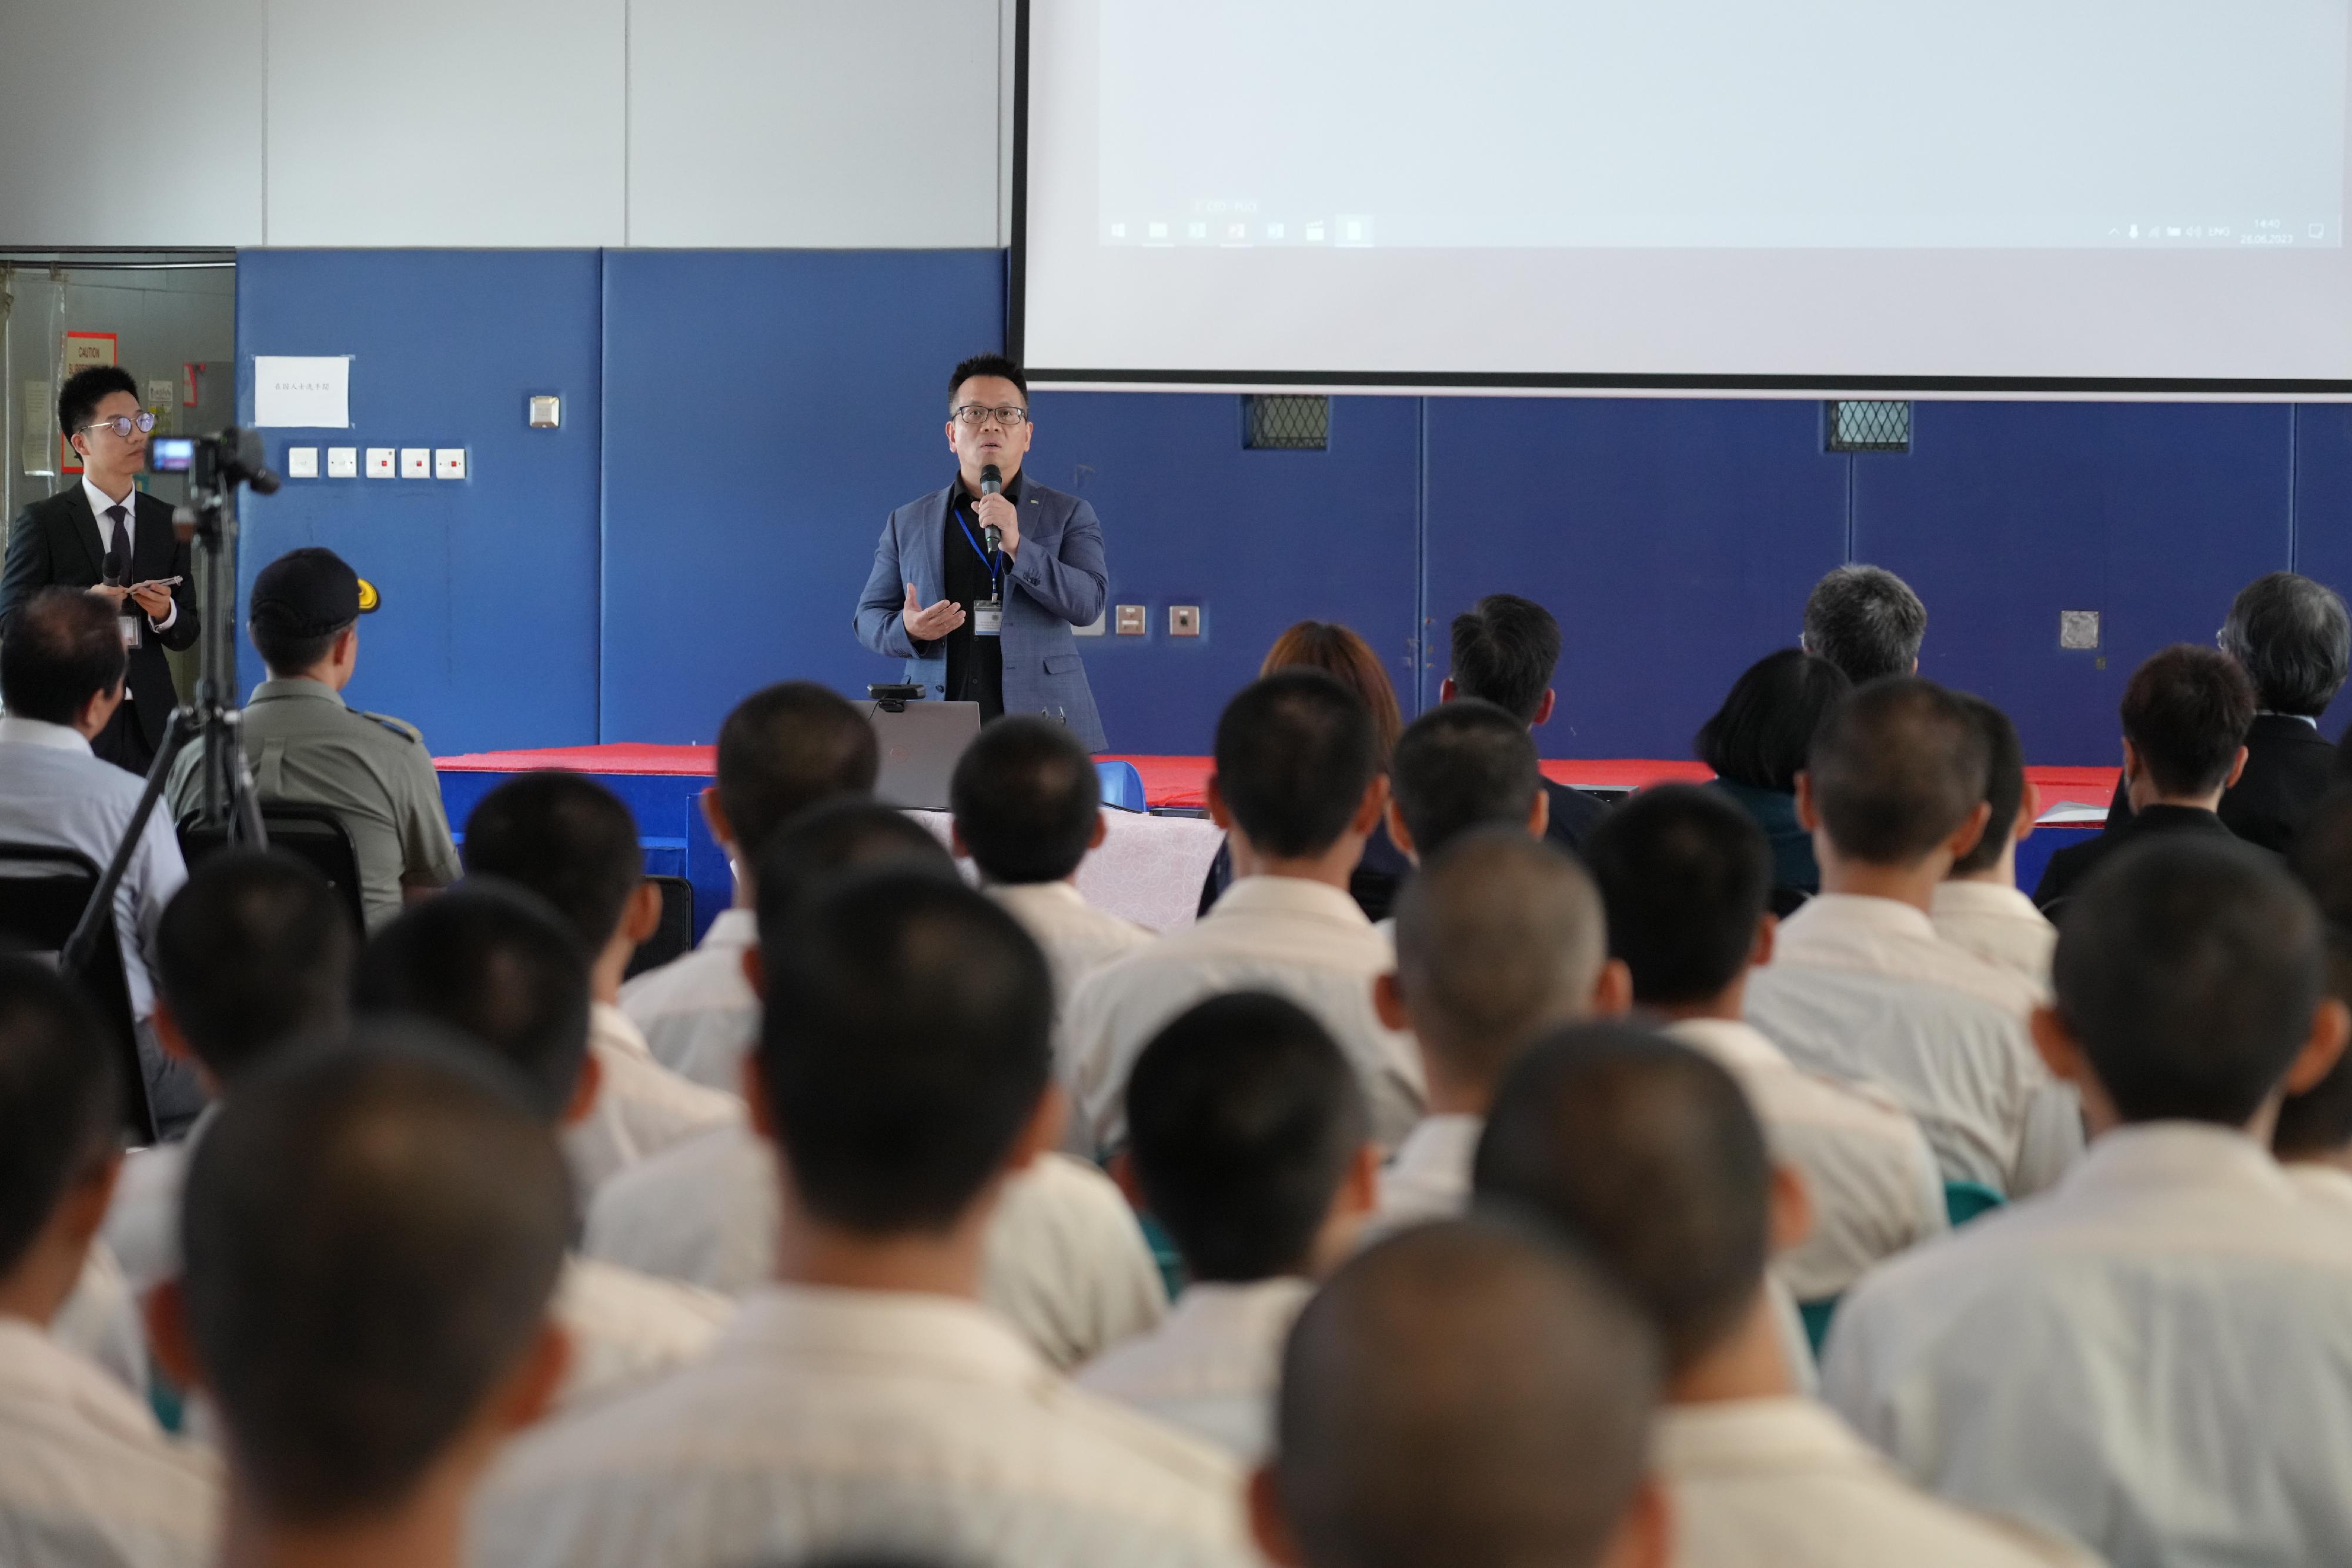 The Correctional Services Department organised an information sharing session on tertiary education programmes for young persons in custody at Sha Tsui Correctional Institution today (June 26). Photo shows the Vice President (Research and Student Development) of the Hong Kong Metropolitan University, Professor Ricky Kwok, speaking at the sharing session.